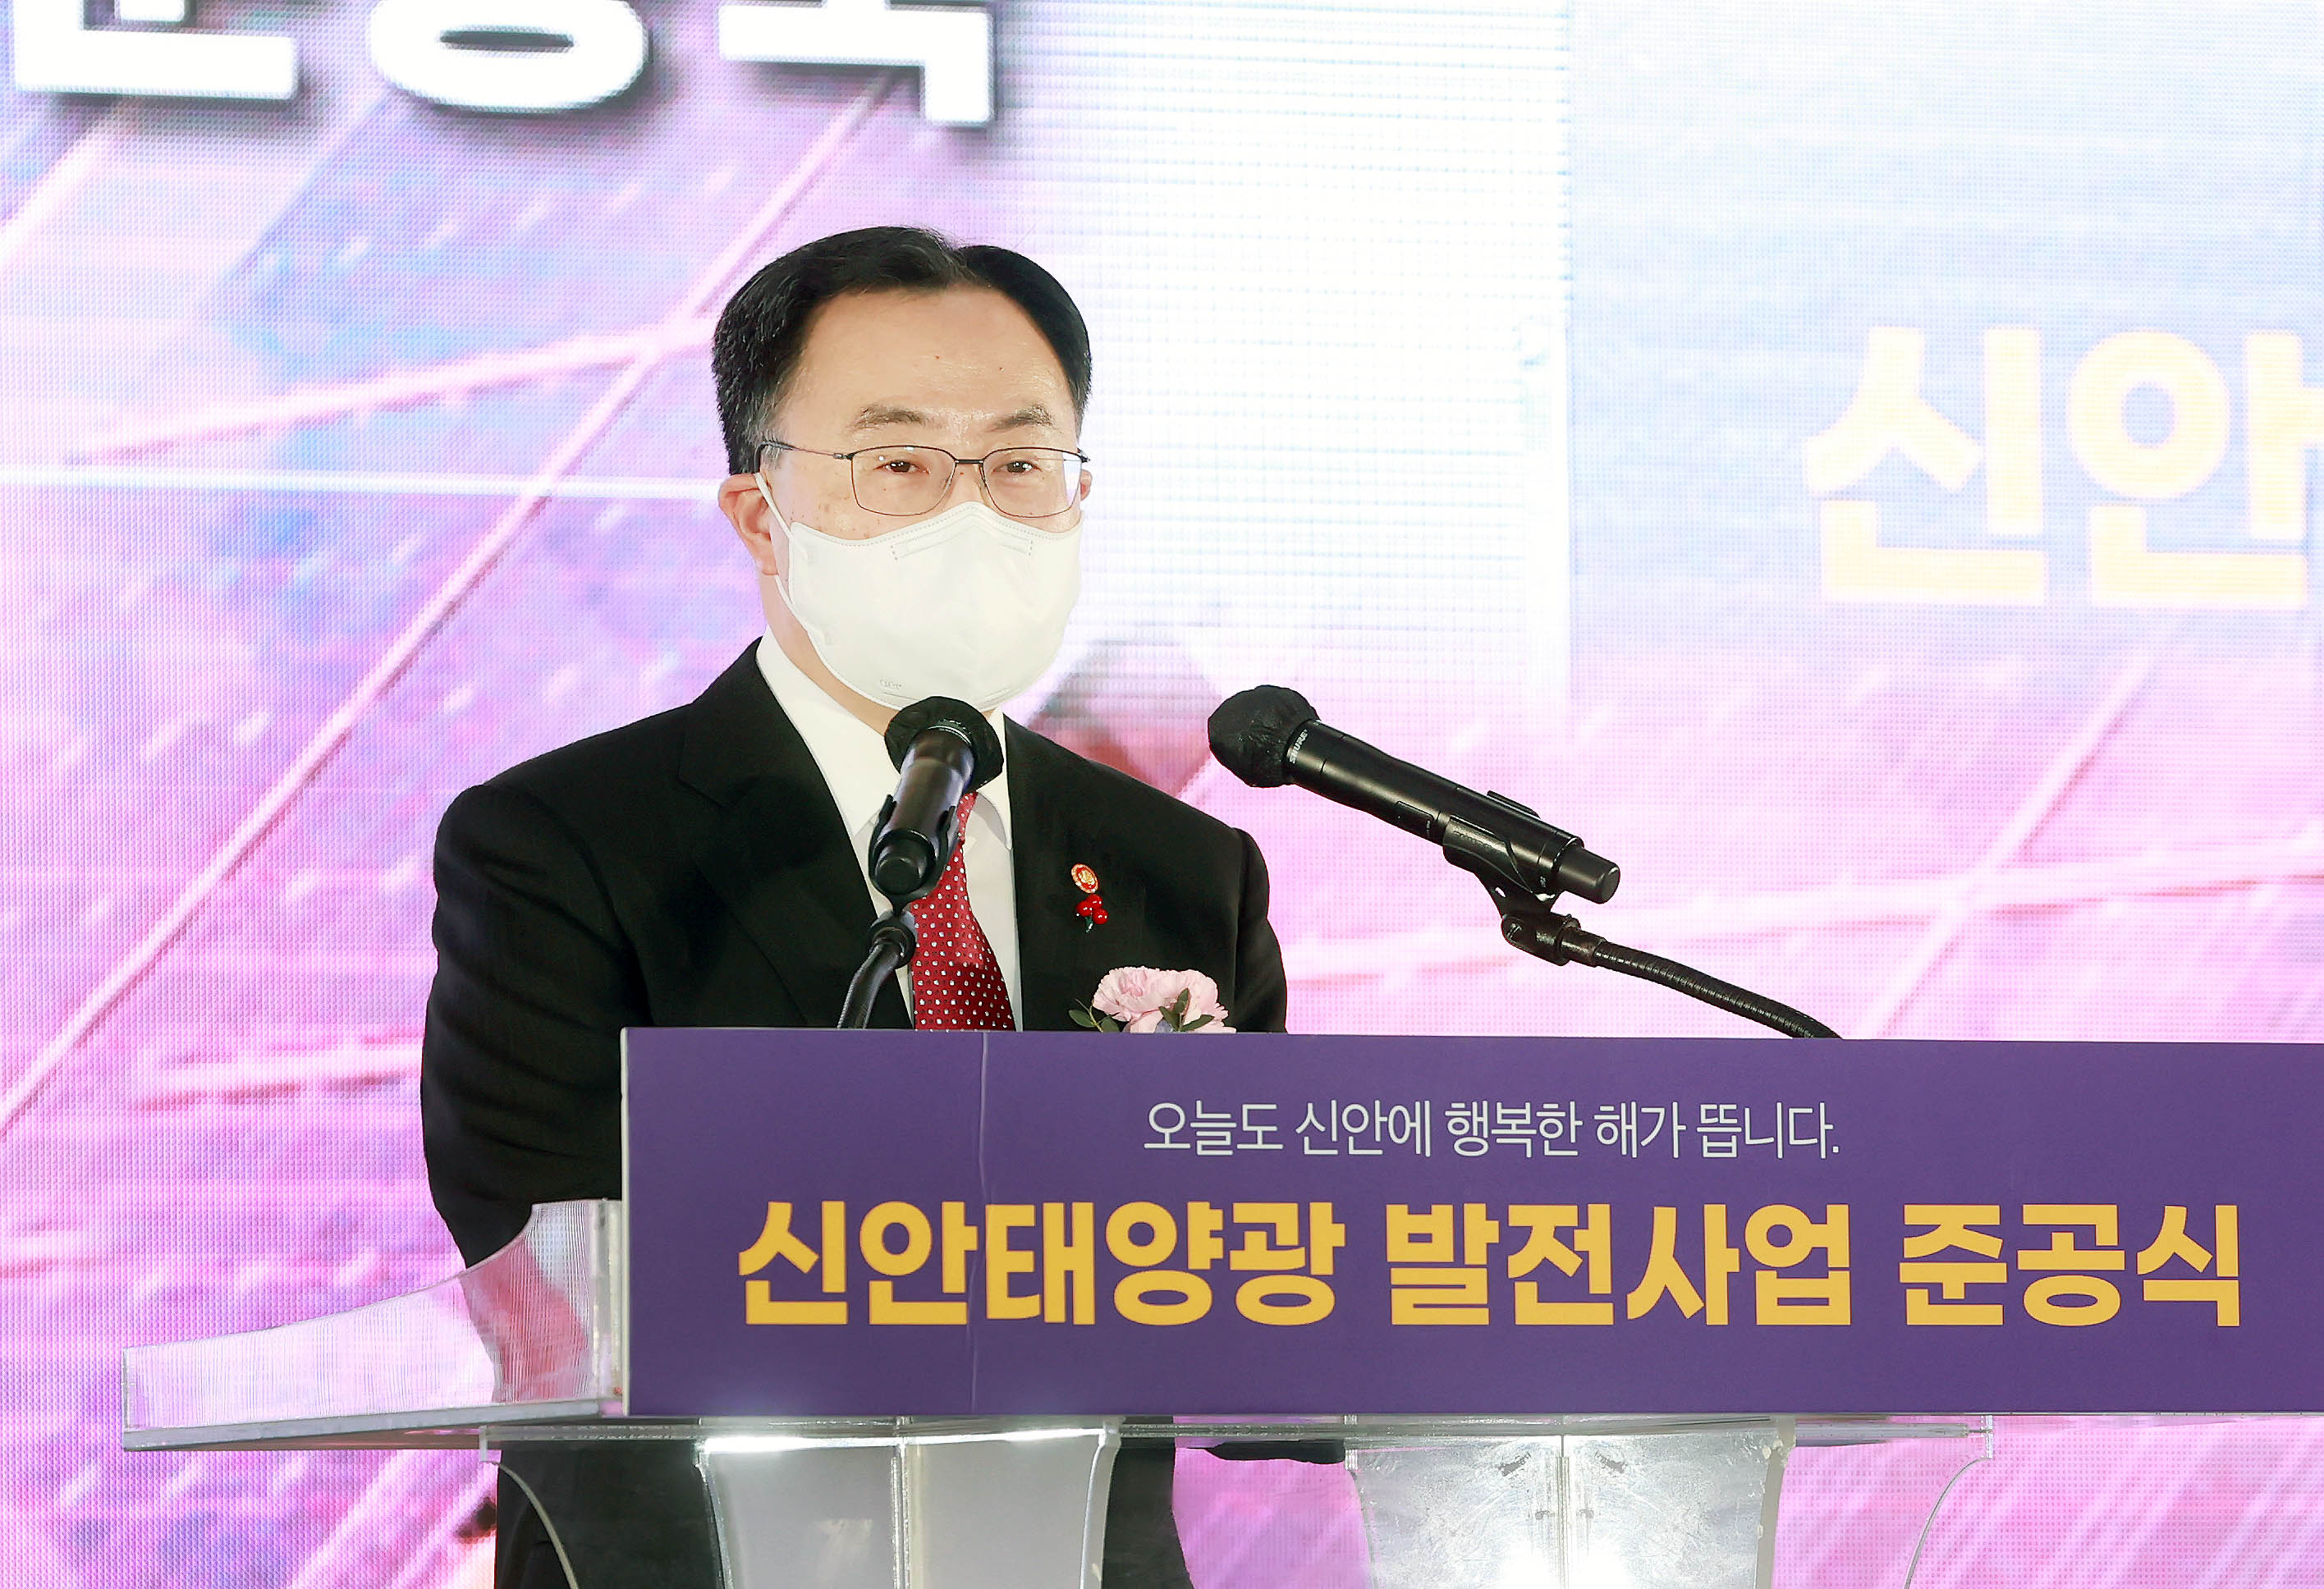 Minister Moon attends completion ceremony of Korea's largest solar plant 